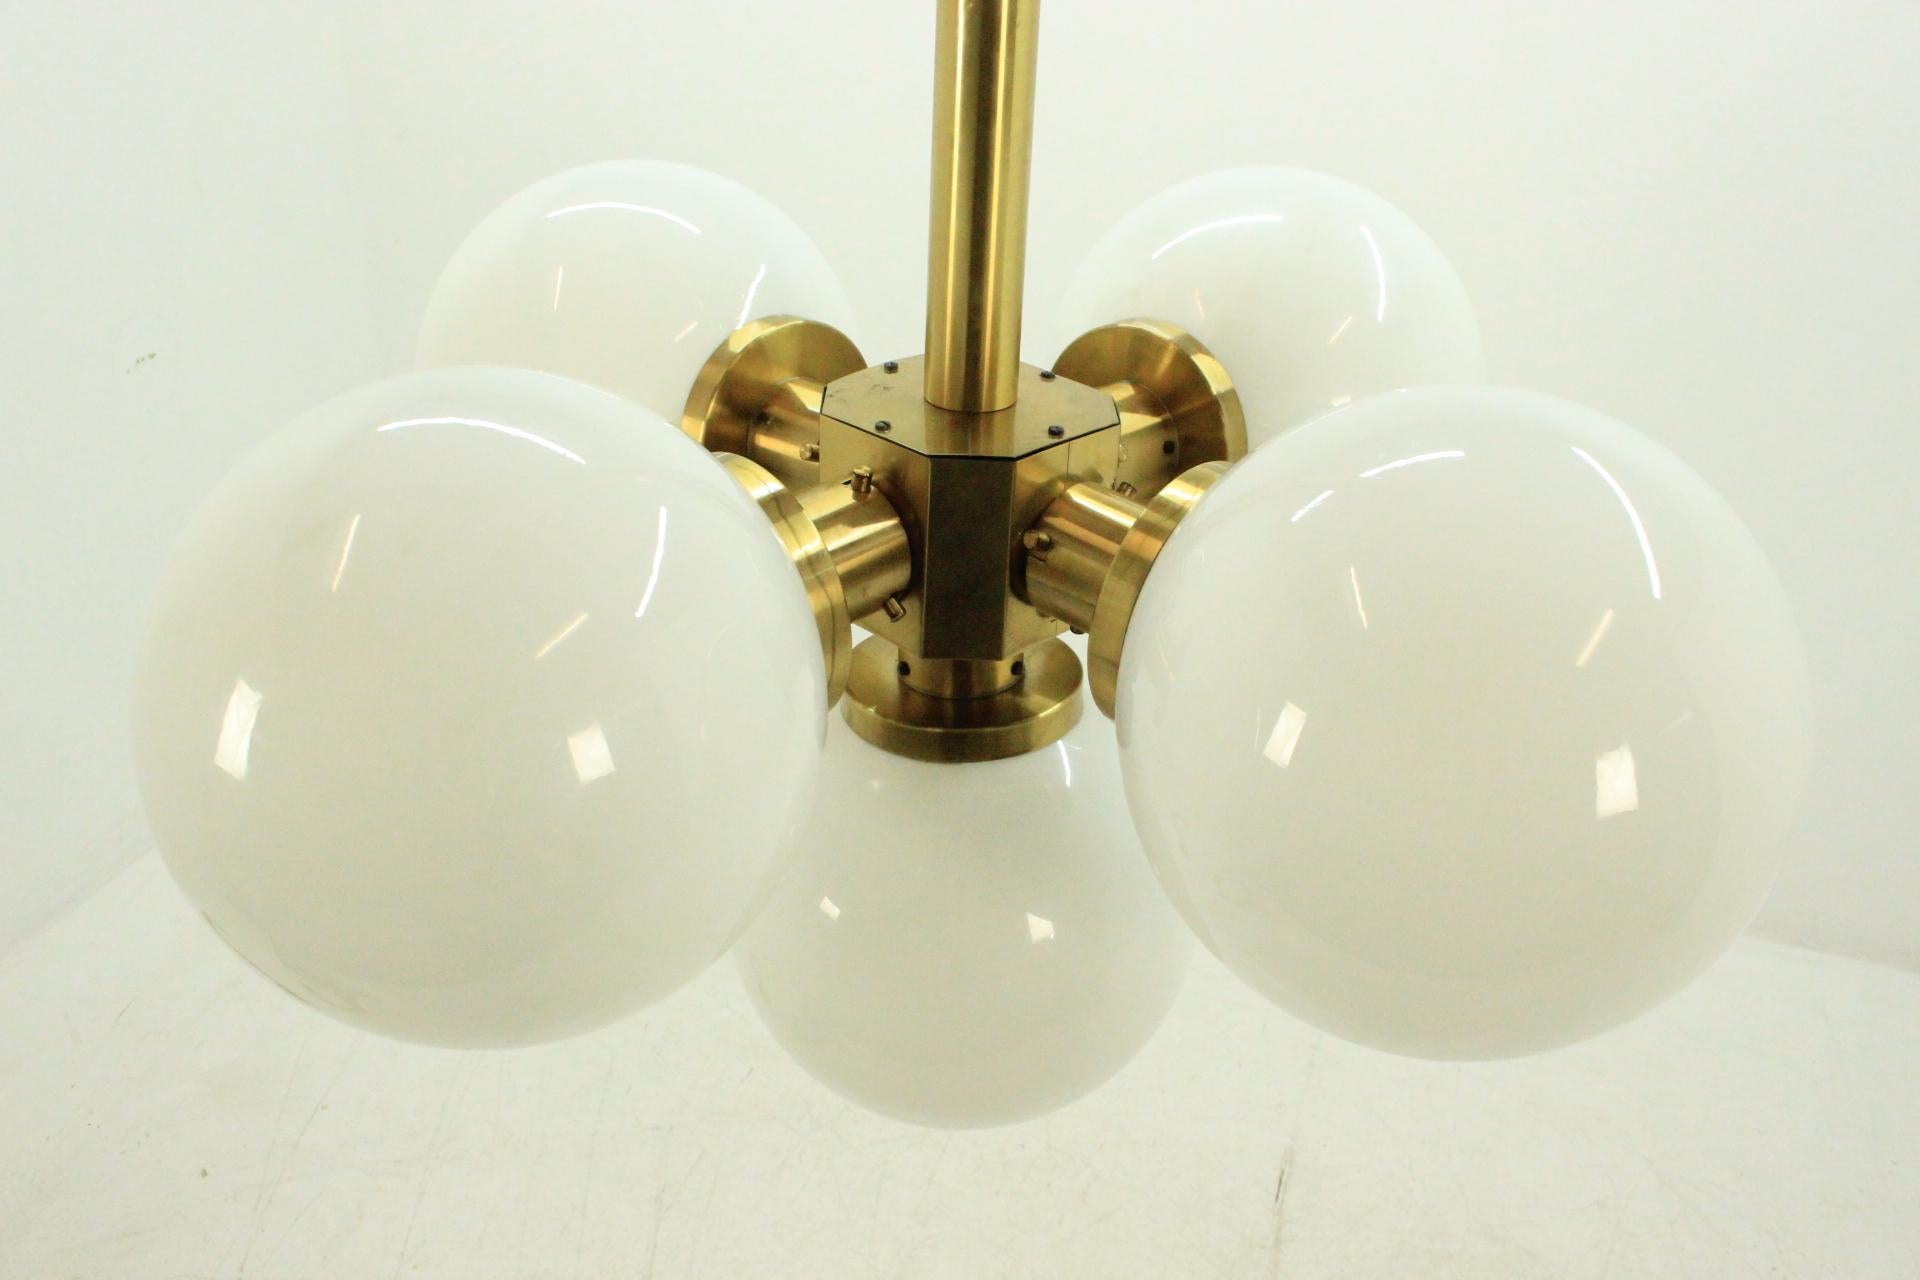 - From hotel in Prague
- 5 balls from opaline glass
- Diameter of ball is 30 cm
- Very representative
- Nice style of lighting
- 8 pieces available
- Very good original condition.